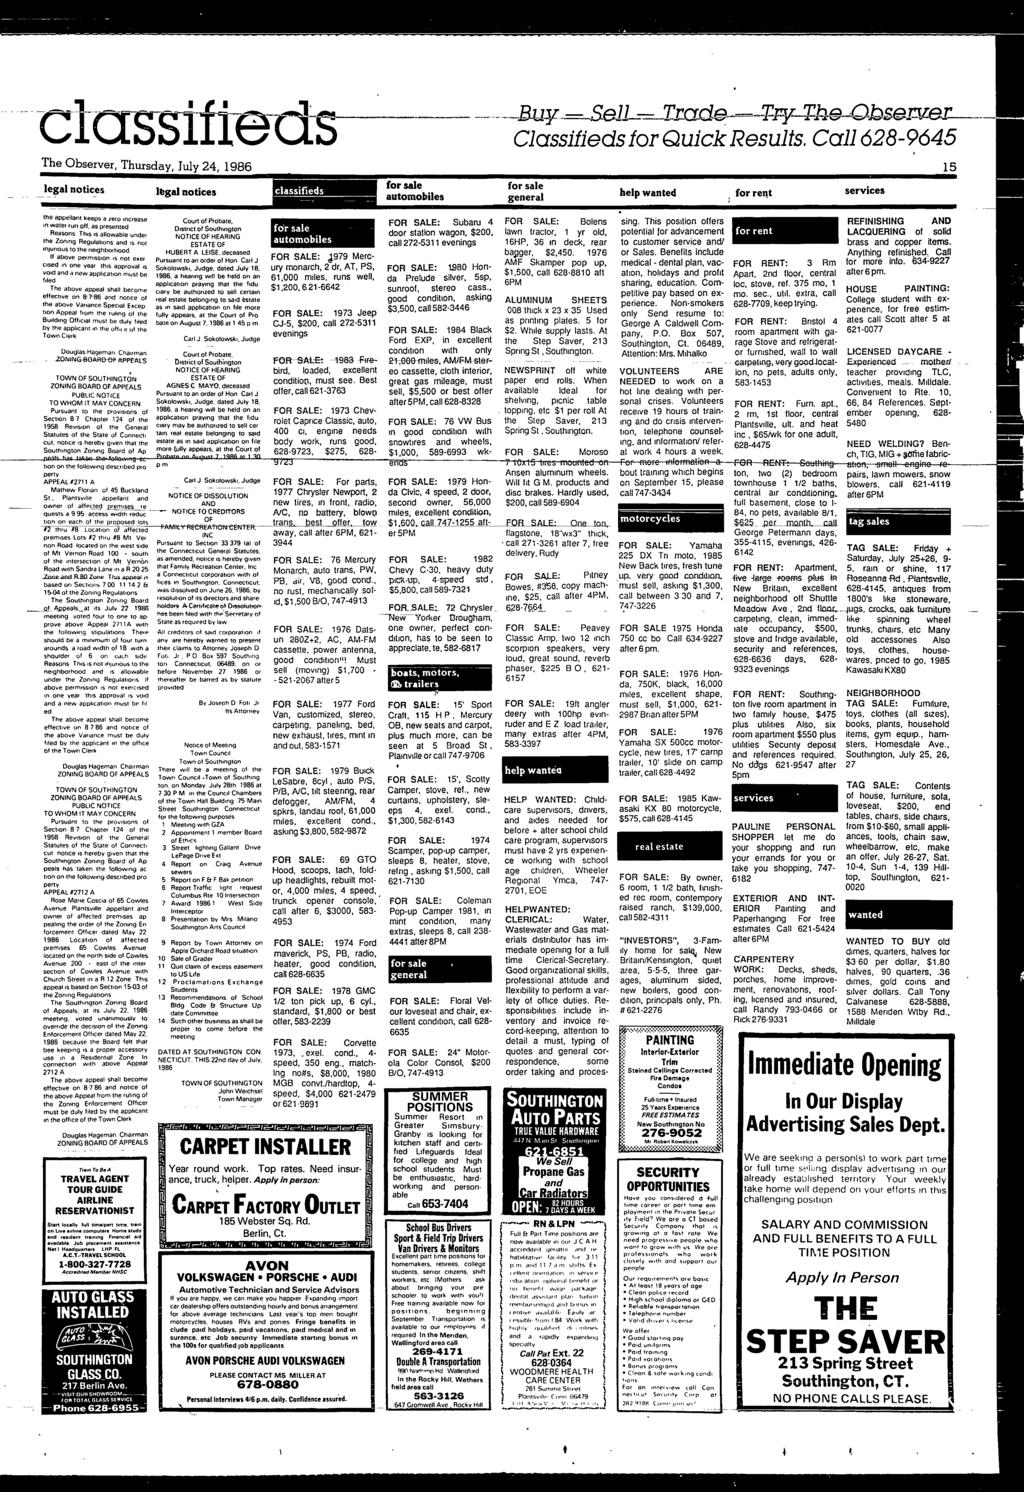 "1 m fm "n. ' The Observer, Thursday, July 24, 1986 Clc[ssi e :fi; for Qu ck 1 esults. Call 628-9645 15 legal notices l gal notices for sale for sale for rent services e tomobiles general help wanted.